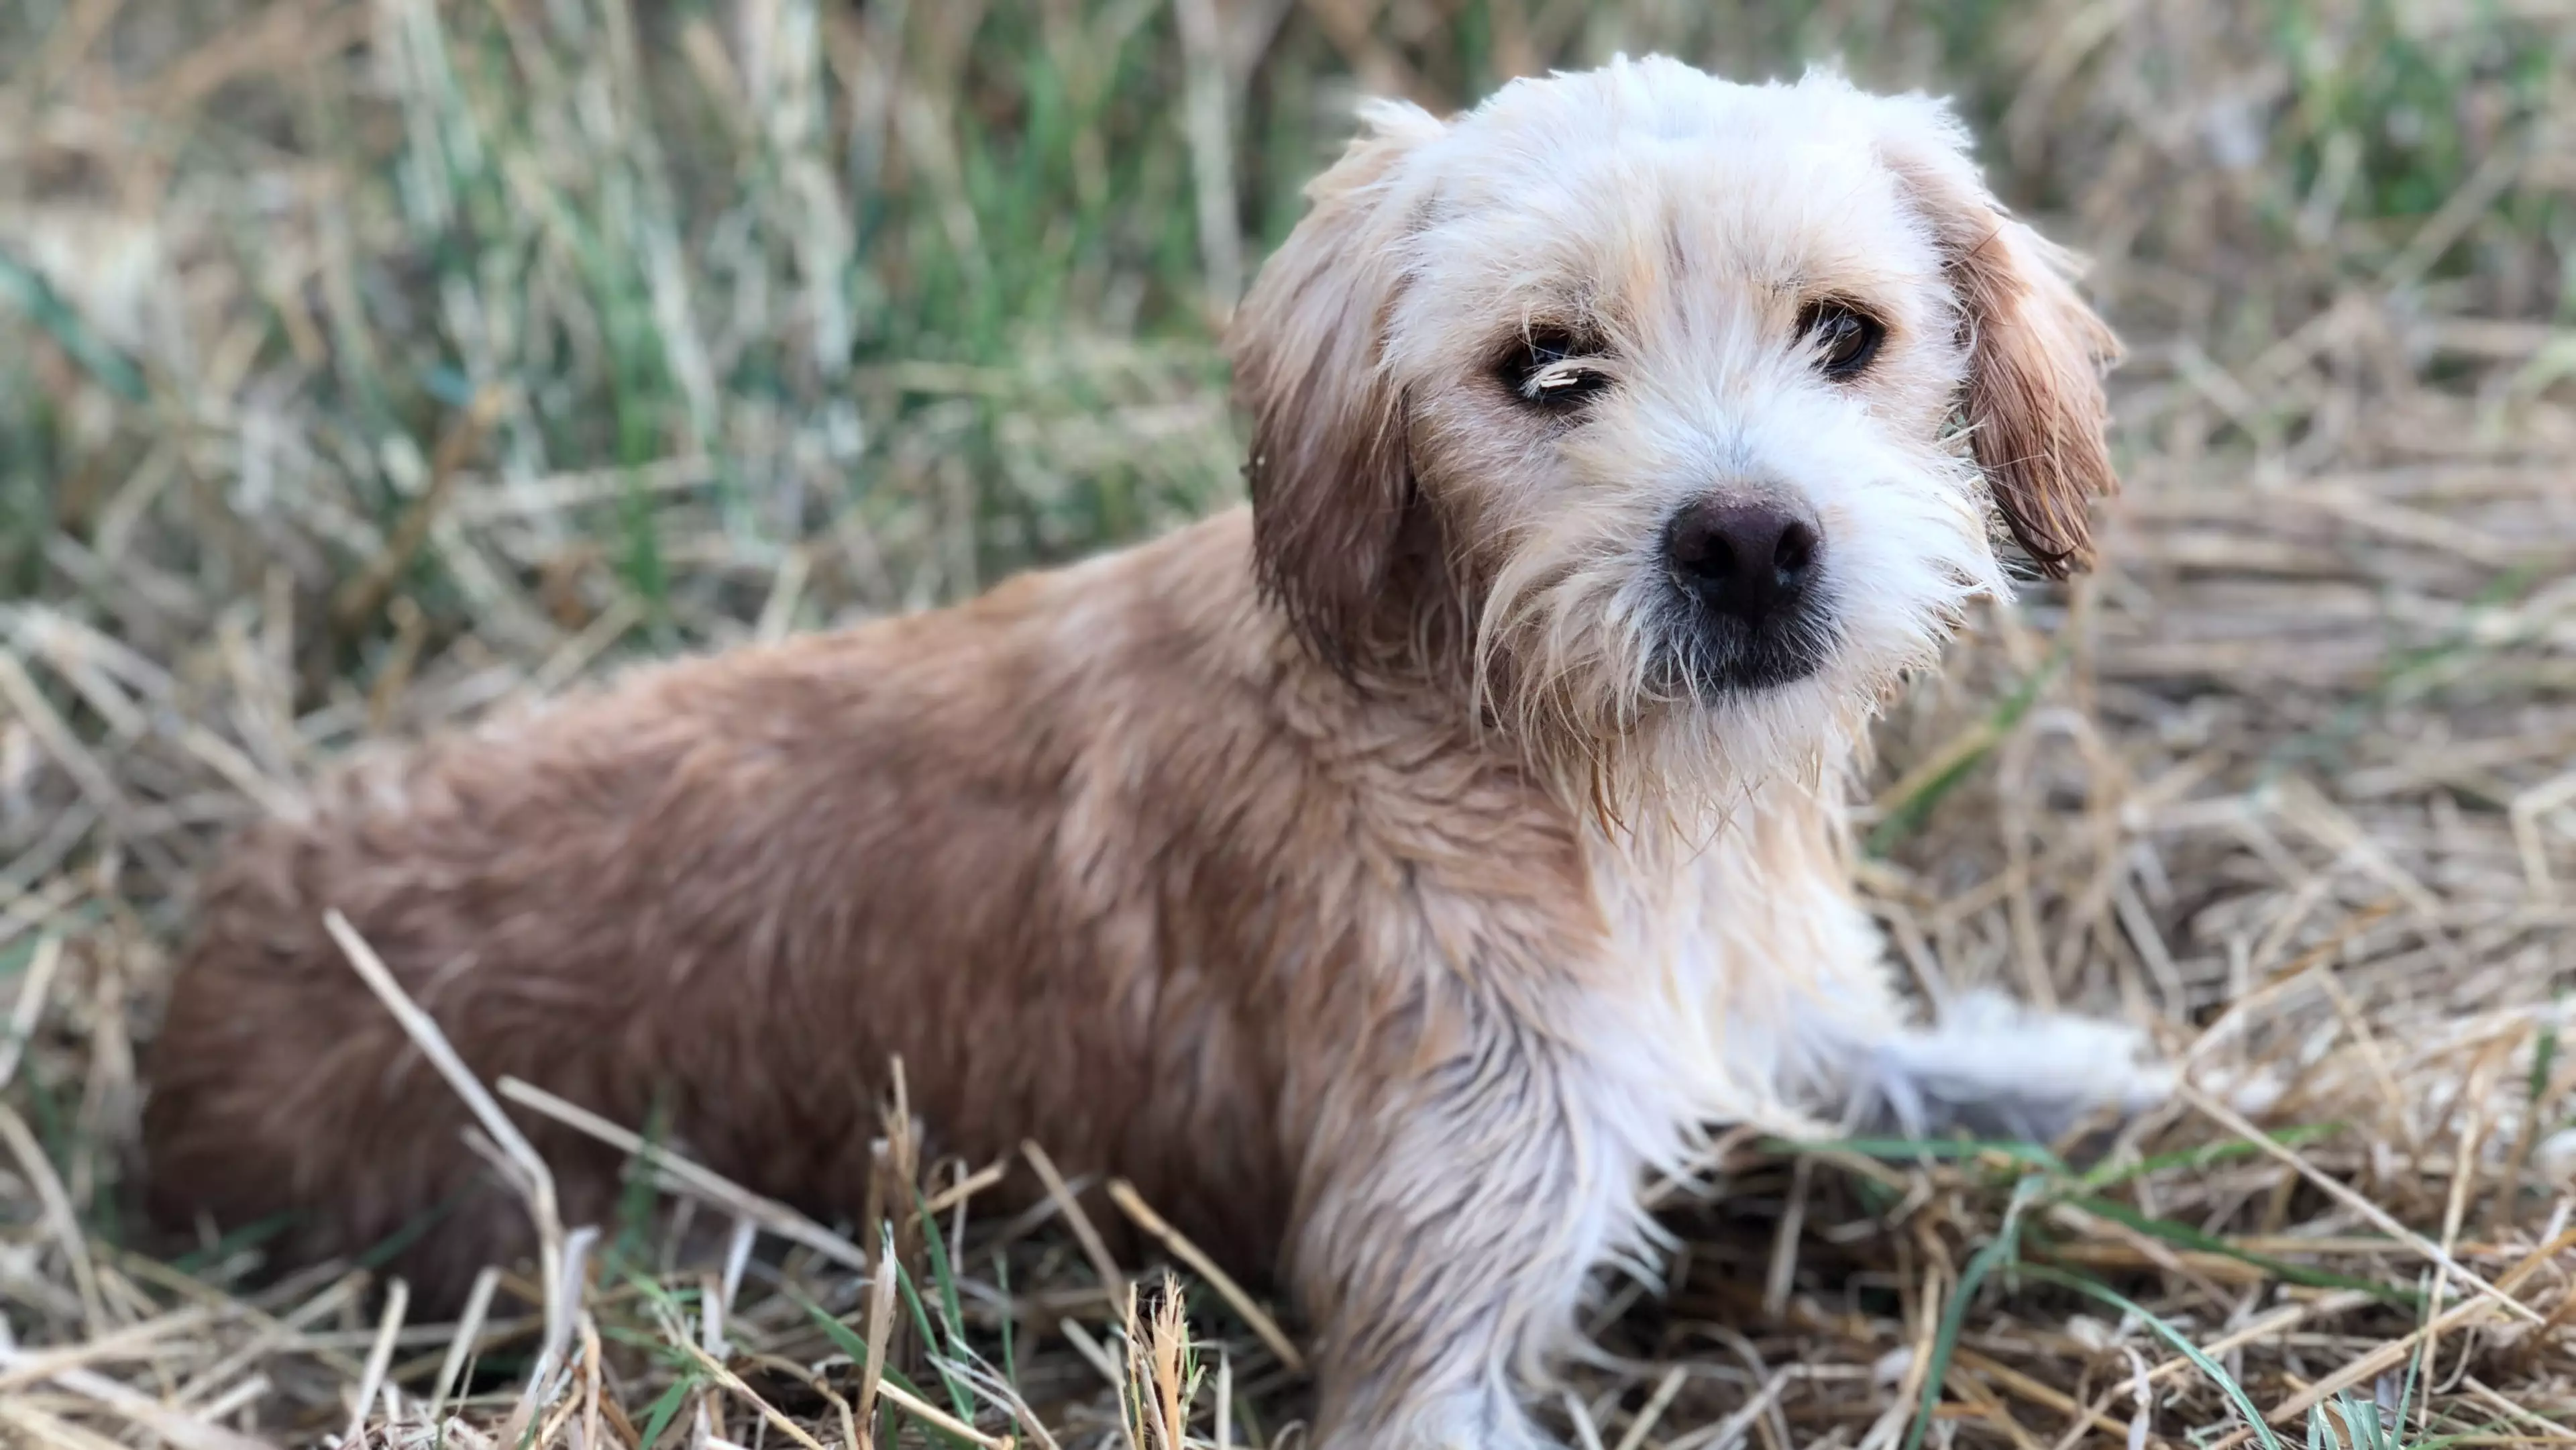 This Charity Is Searching For The World's Cutest Dog